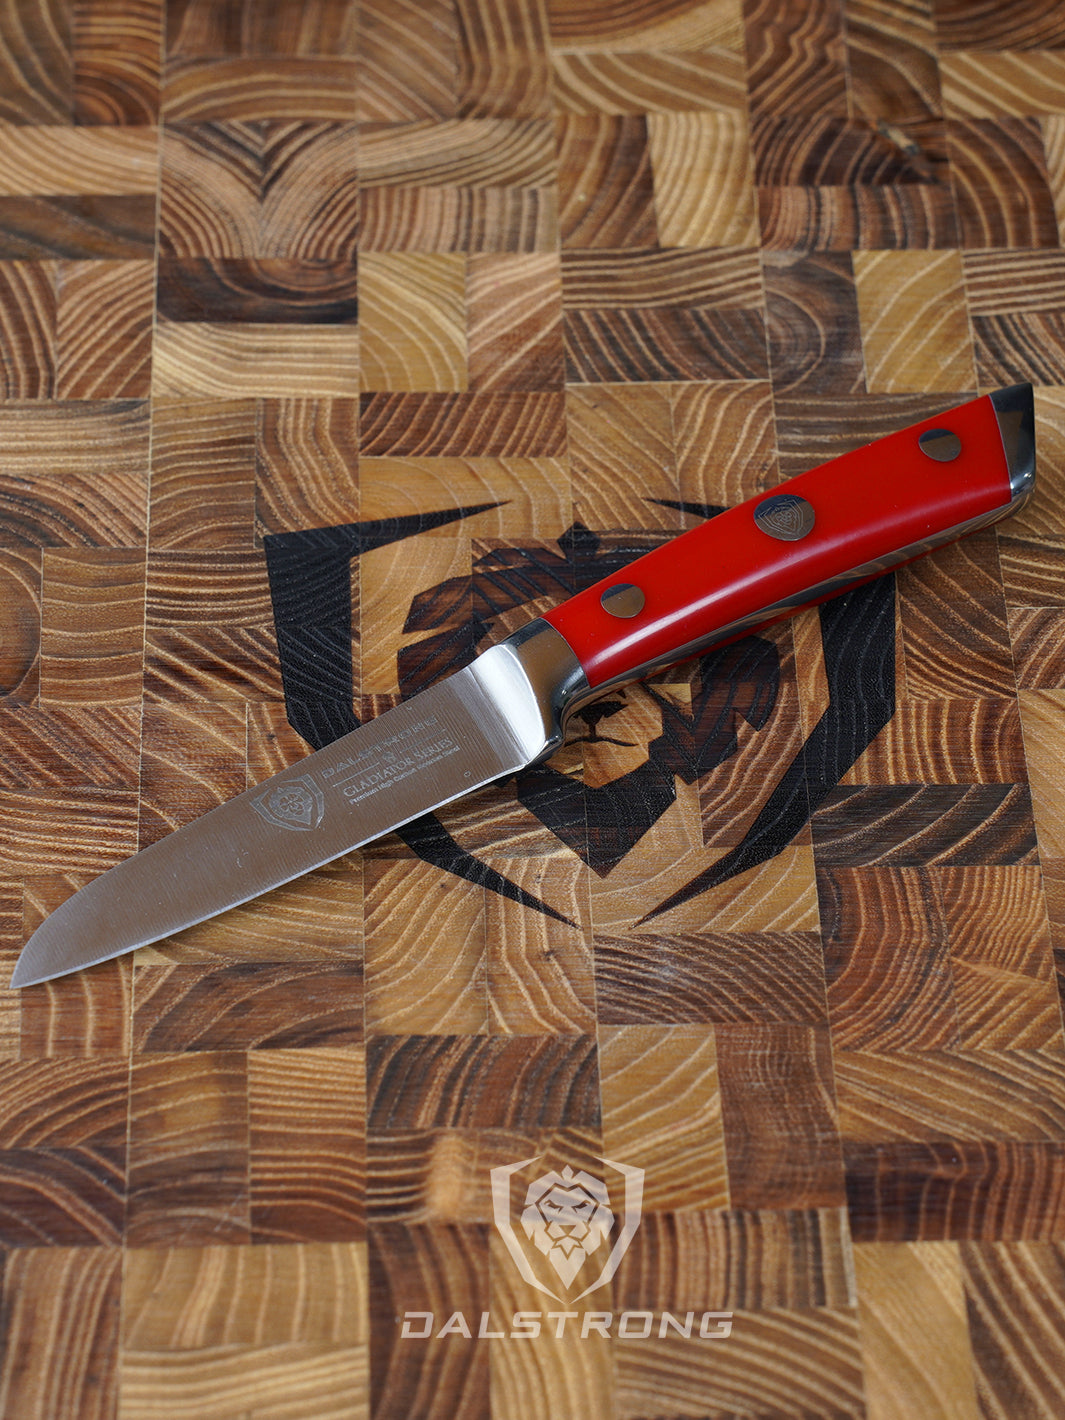 Dalstrong gladiator series 3.5 inch paring knife with red handle on a dalstrong wooden cutting board.